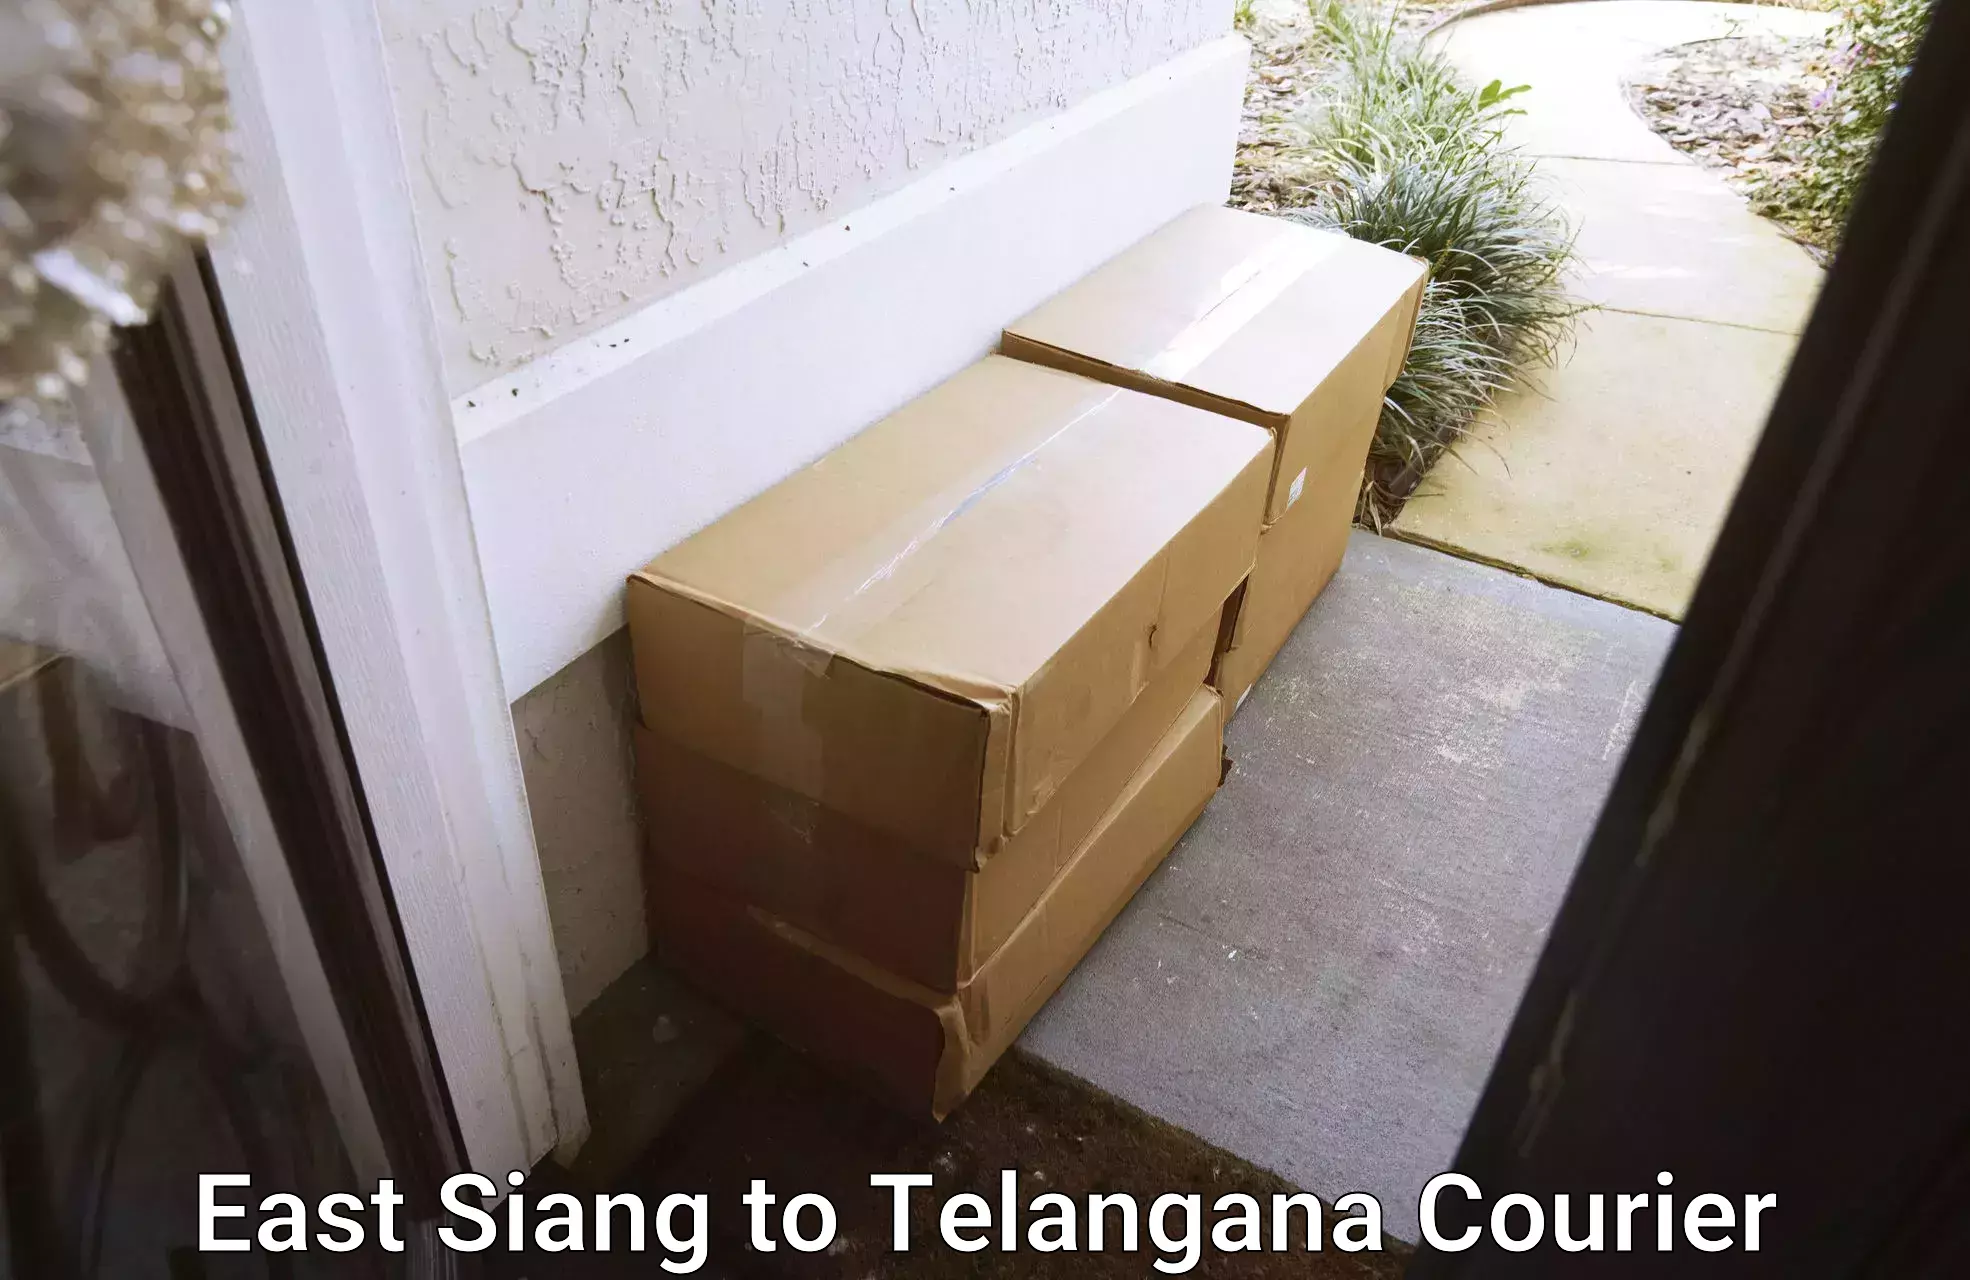 Courier service innovation in East Siang to Rangareddy